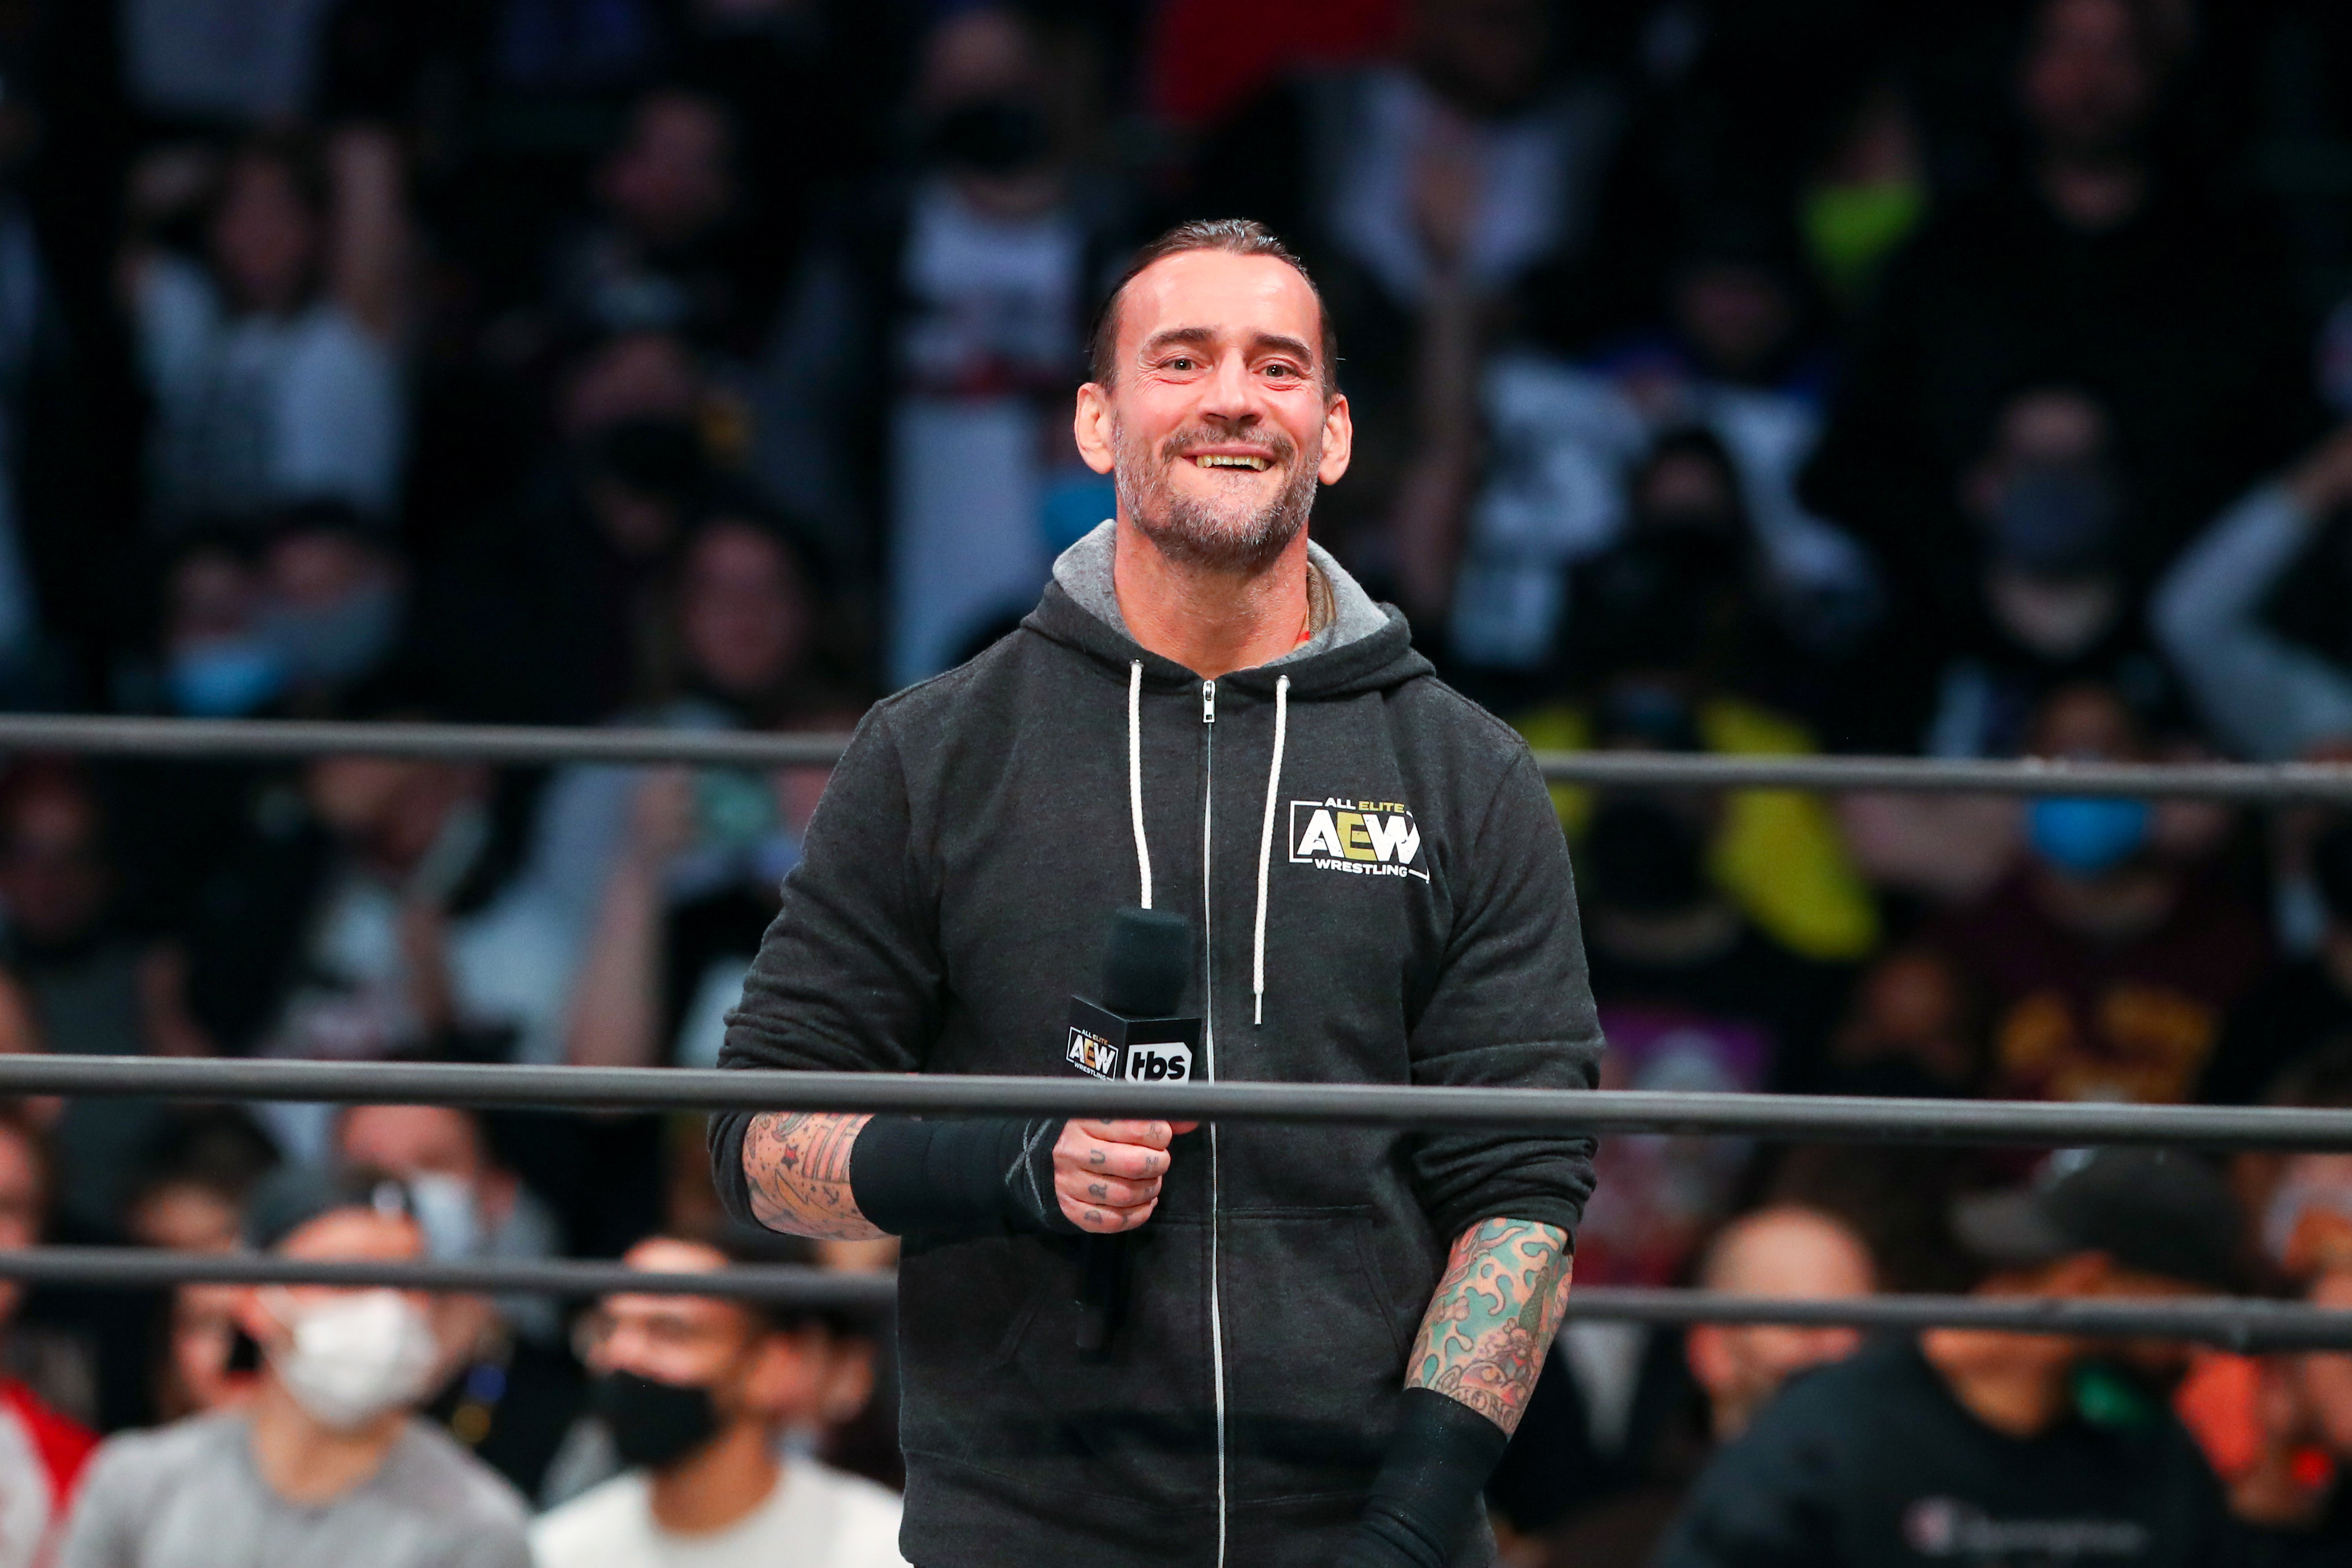 In 2021, Punk debuted with All Elite Wrestling, marking his return to pro wrestling after seven years away from the industry